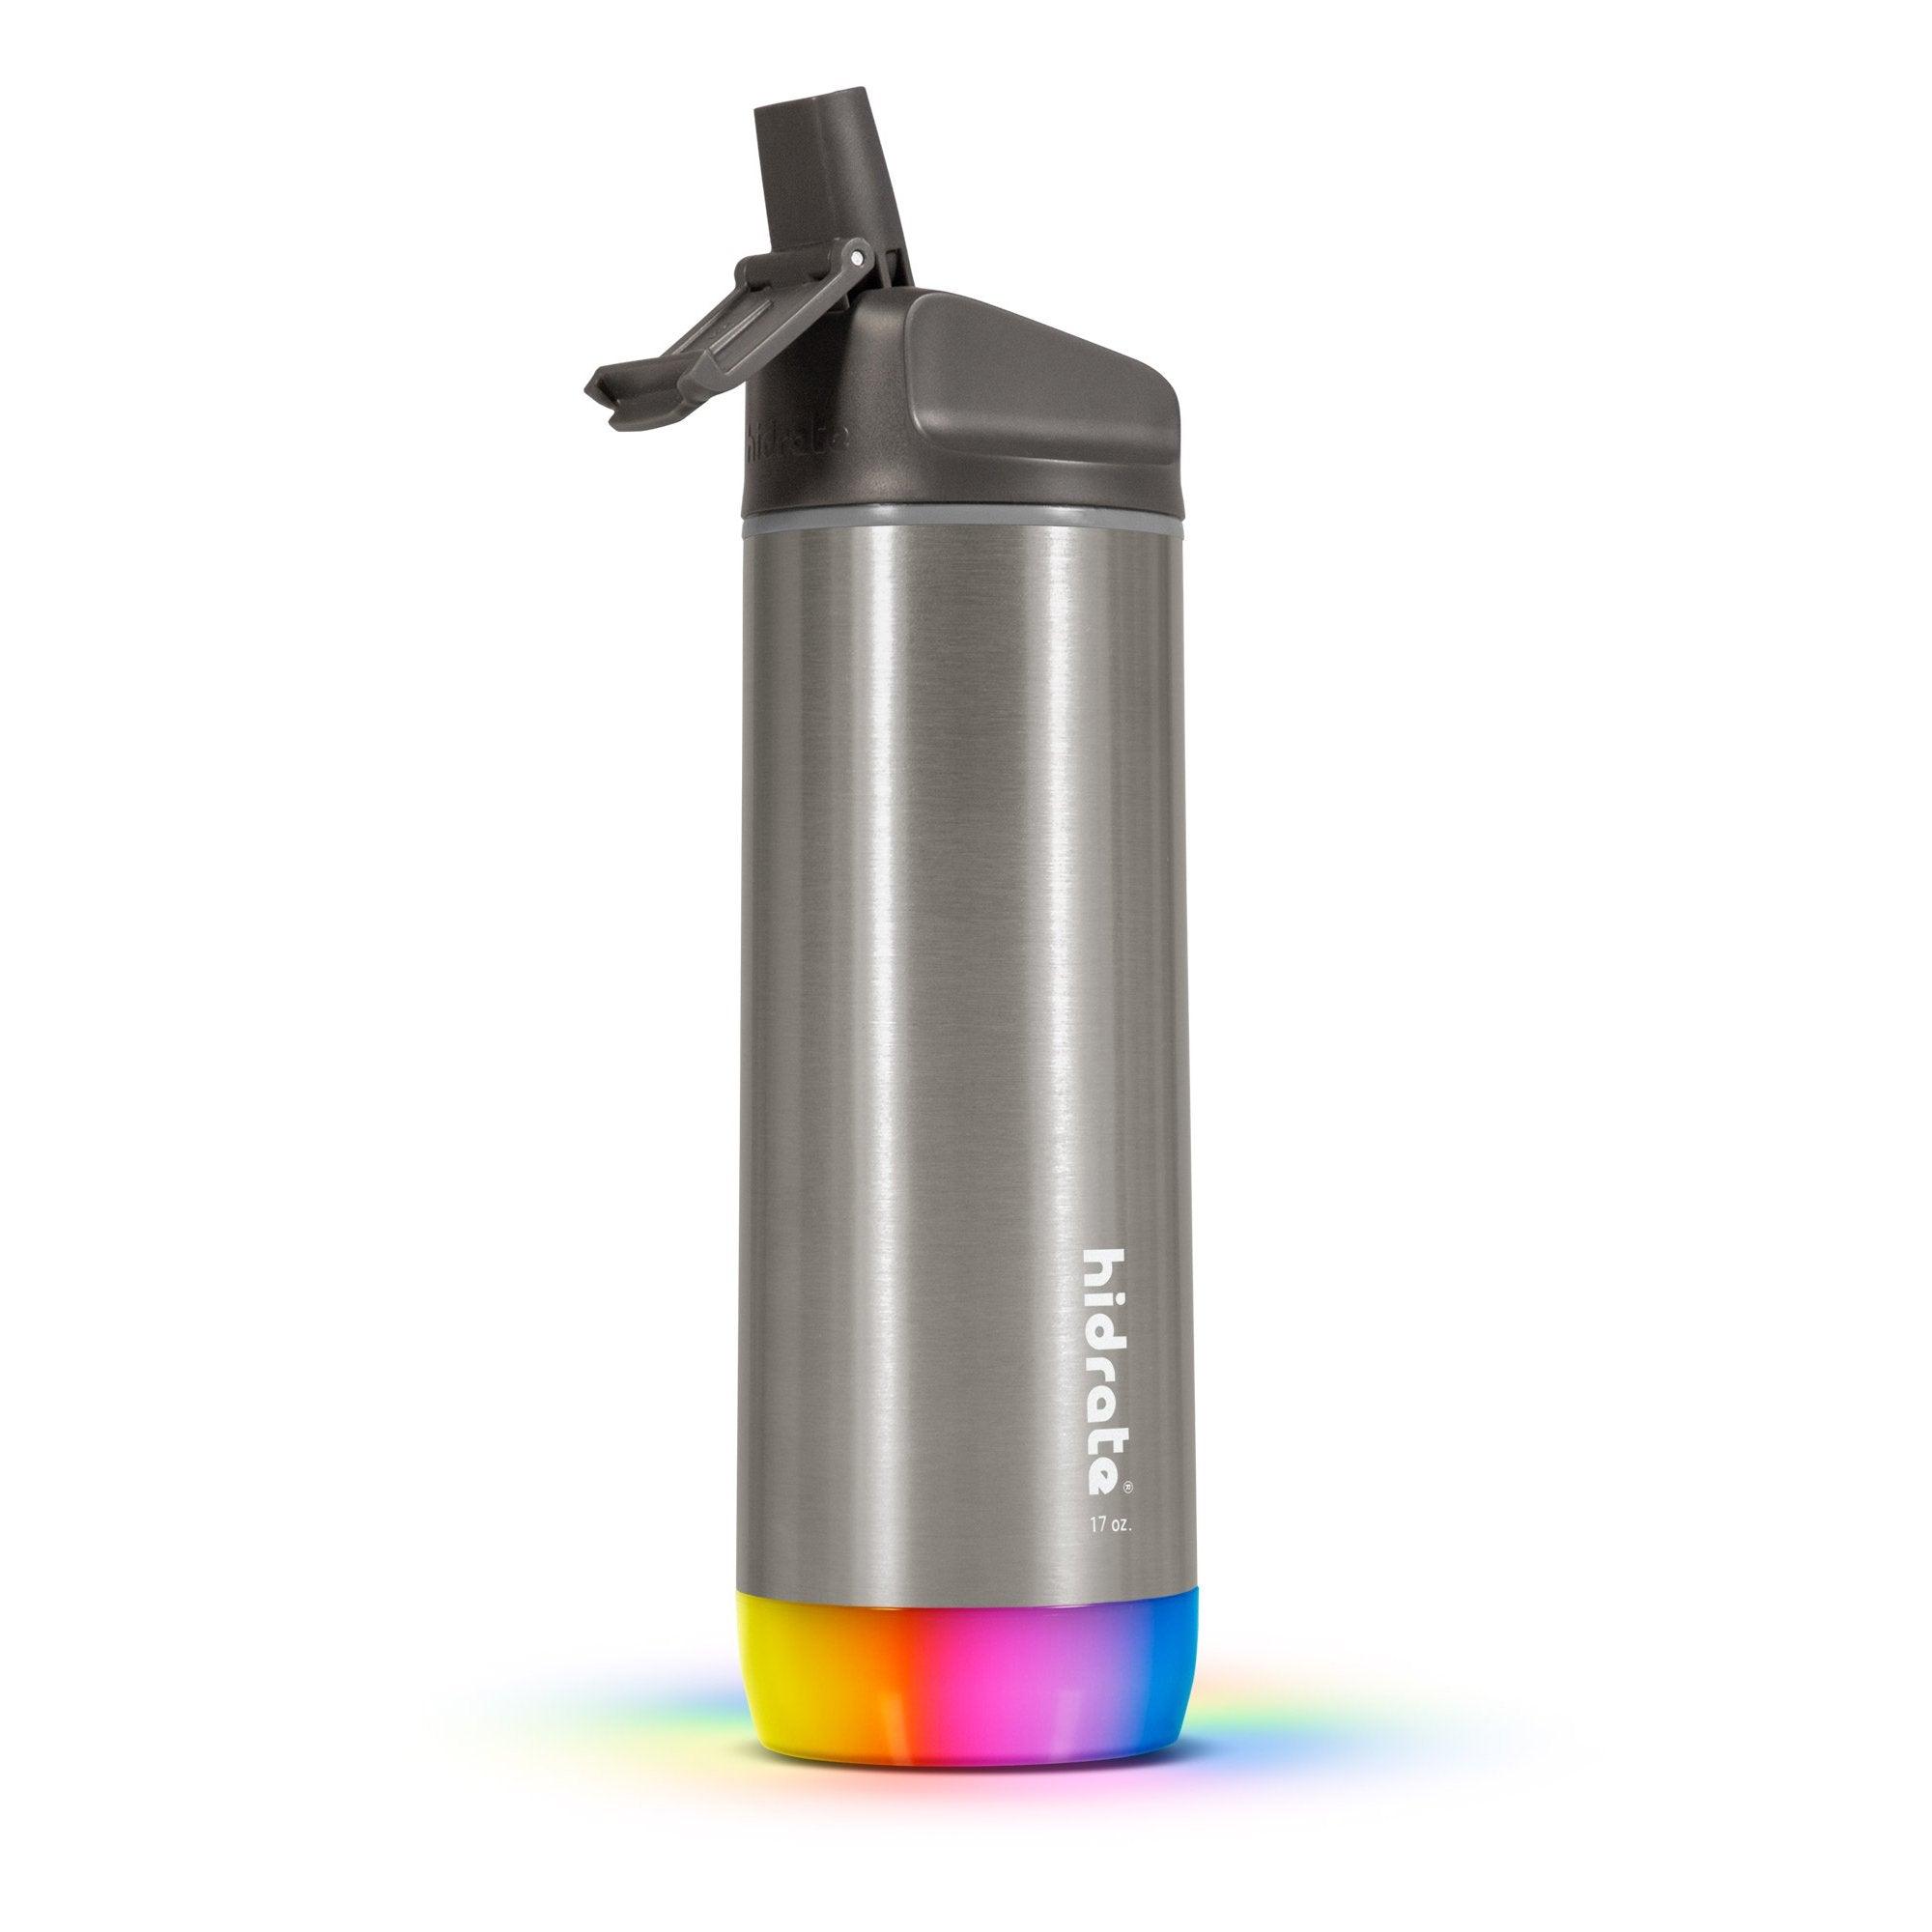 HidrateSpark Straw 17Oz / 500ml - World's Smartest Water Bottle, Hydration Tracker, Lights Up to Remind a Drink, Stainless Steel Double Wall Vacuum-insulated, Rechargeable Battery - Stainless